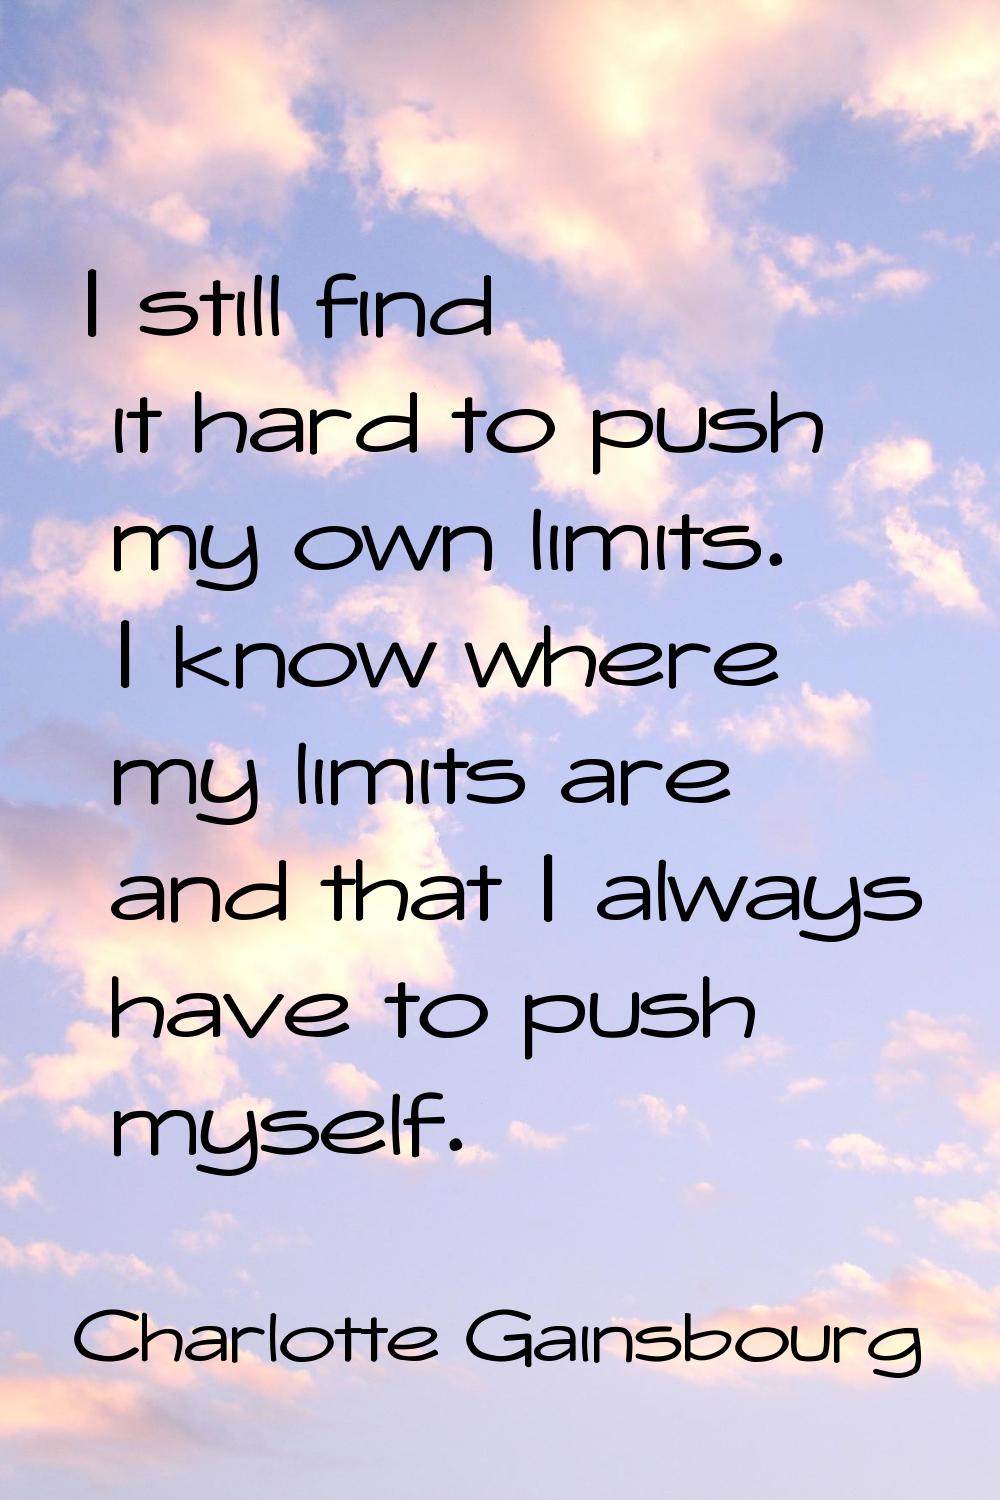 I still find it hard to push my own limits. I know where my limits are and that I always have to pu